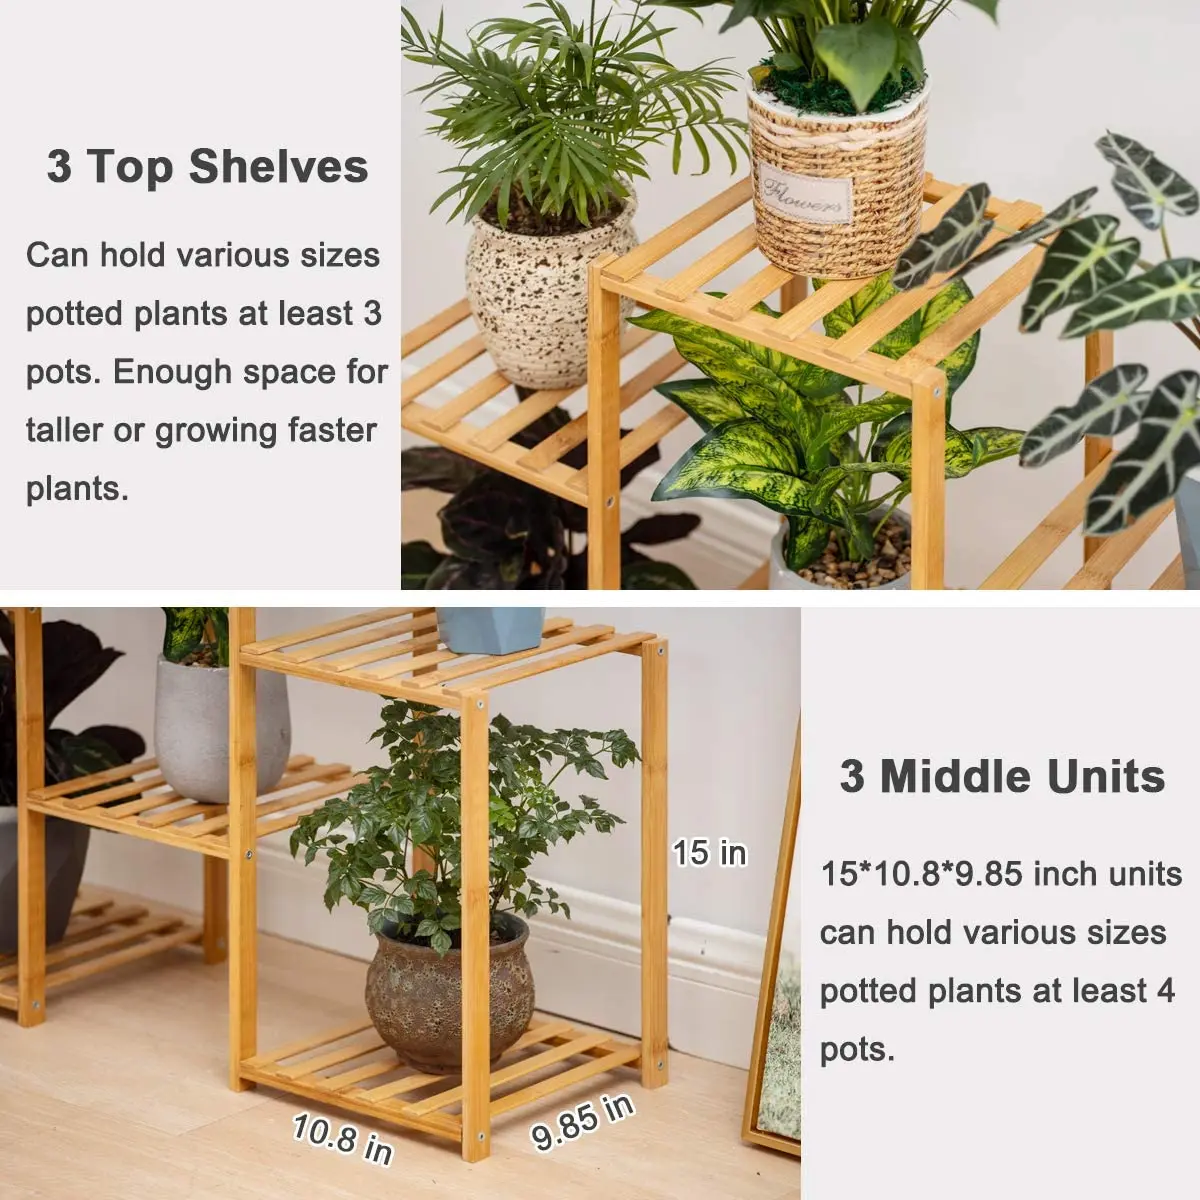 Custom Bamboo Wood Ladder Plant Stand 3-tier Foldable Organizer Flower Display Shelf Rack For Home Patio Lawn Garden